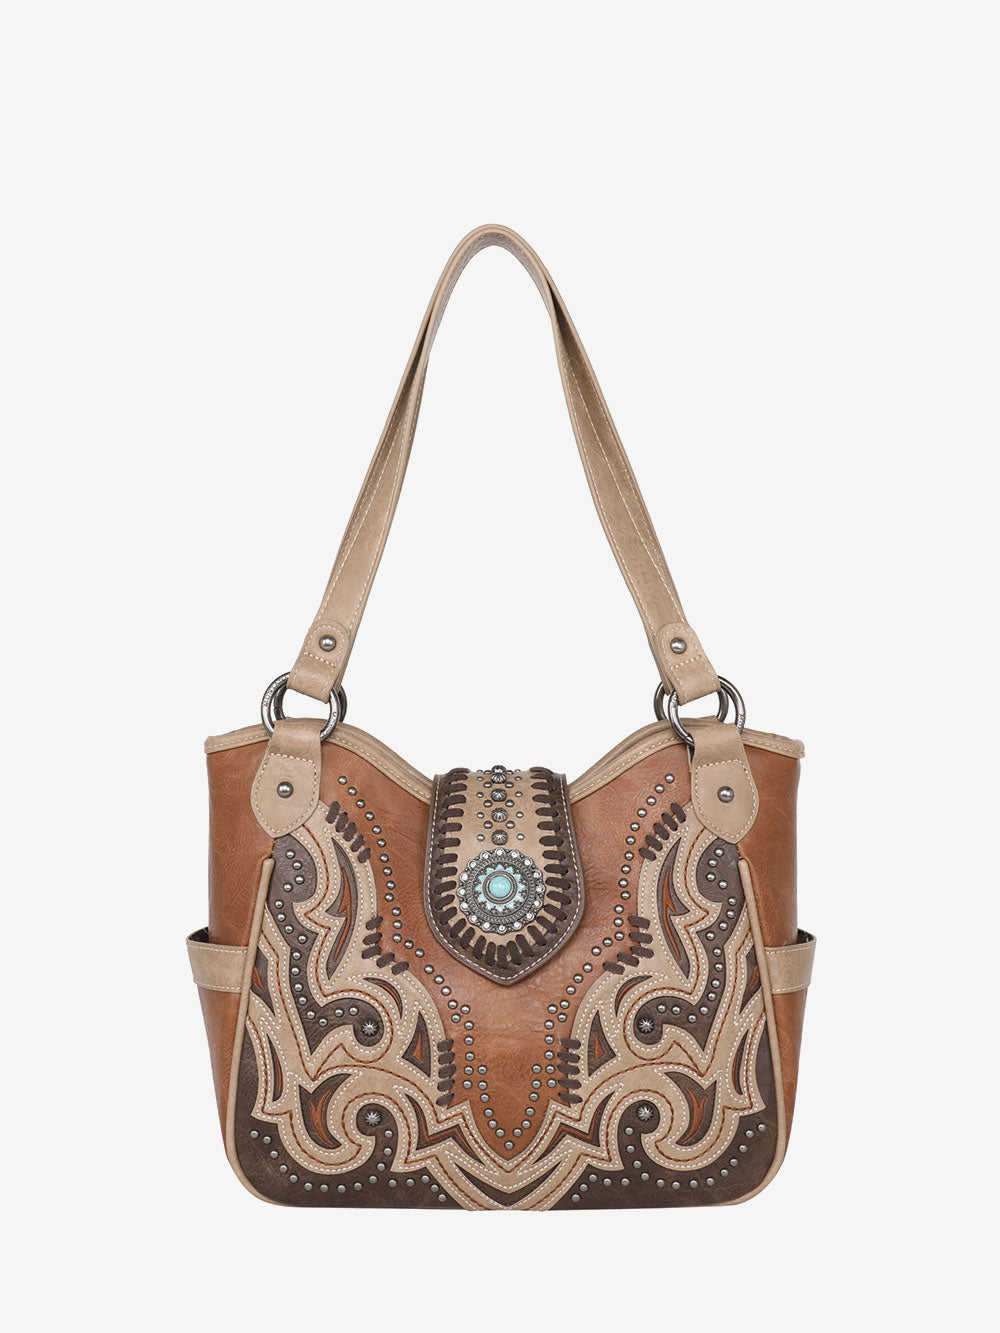 Montana West Laser Cut-out Buckle Concealed Carry Tote - Montana West World